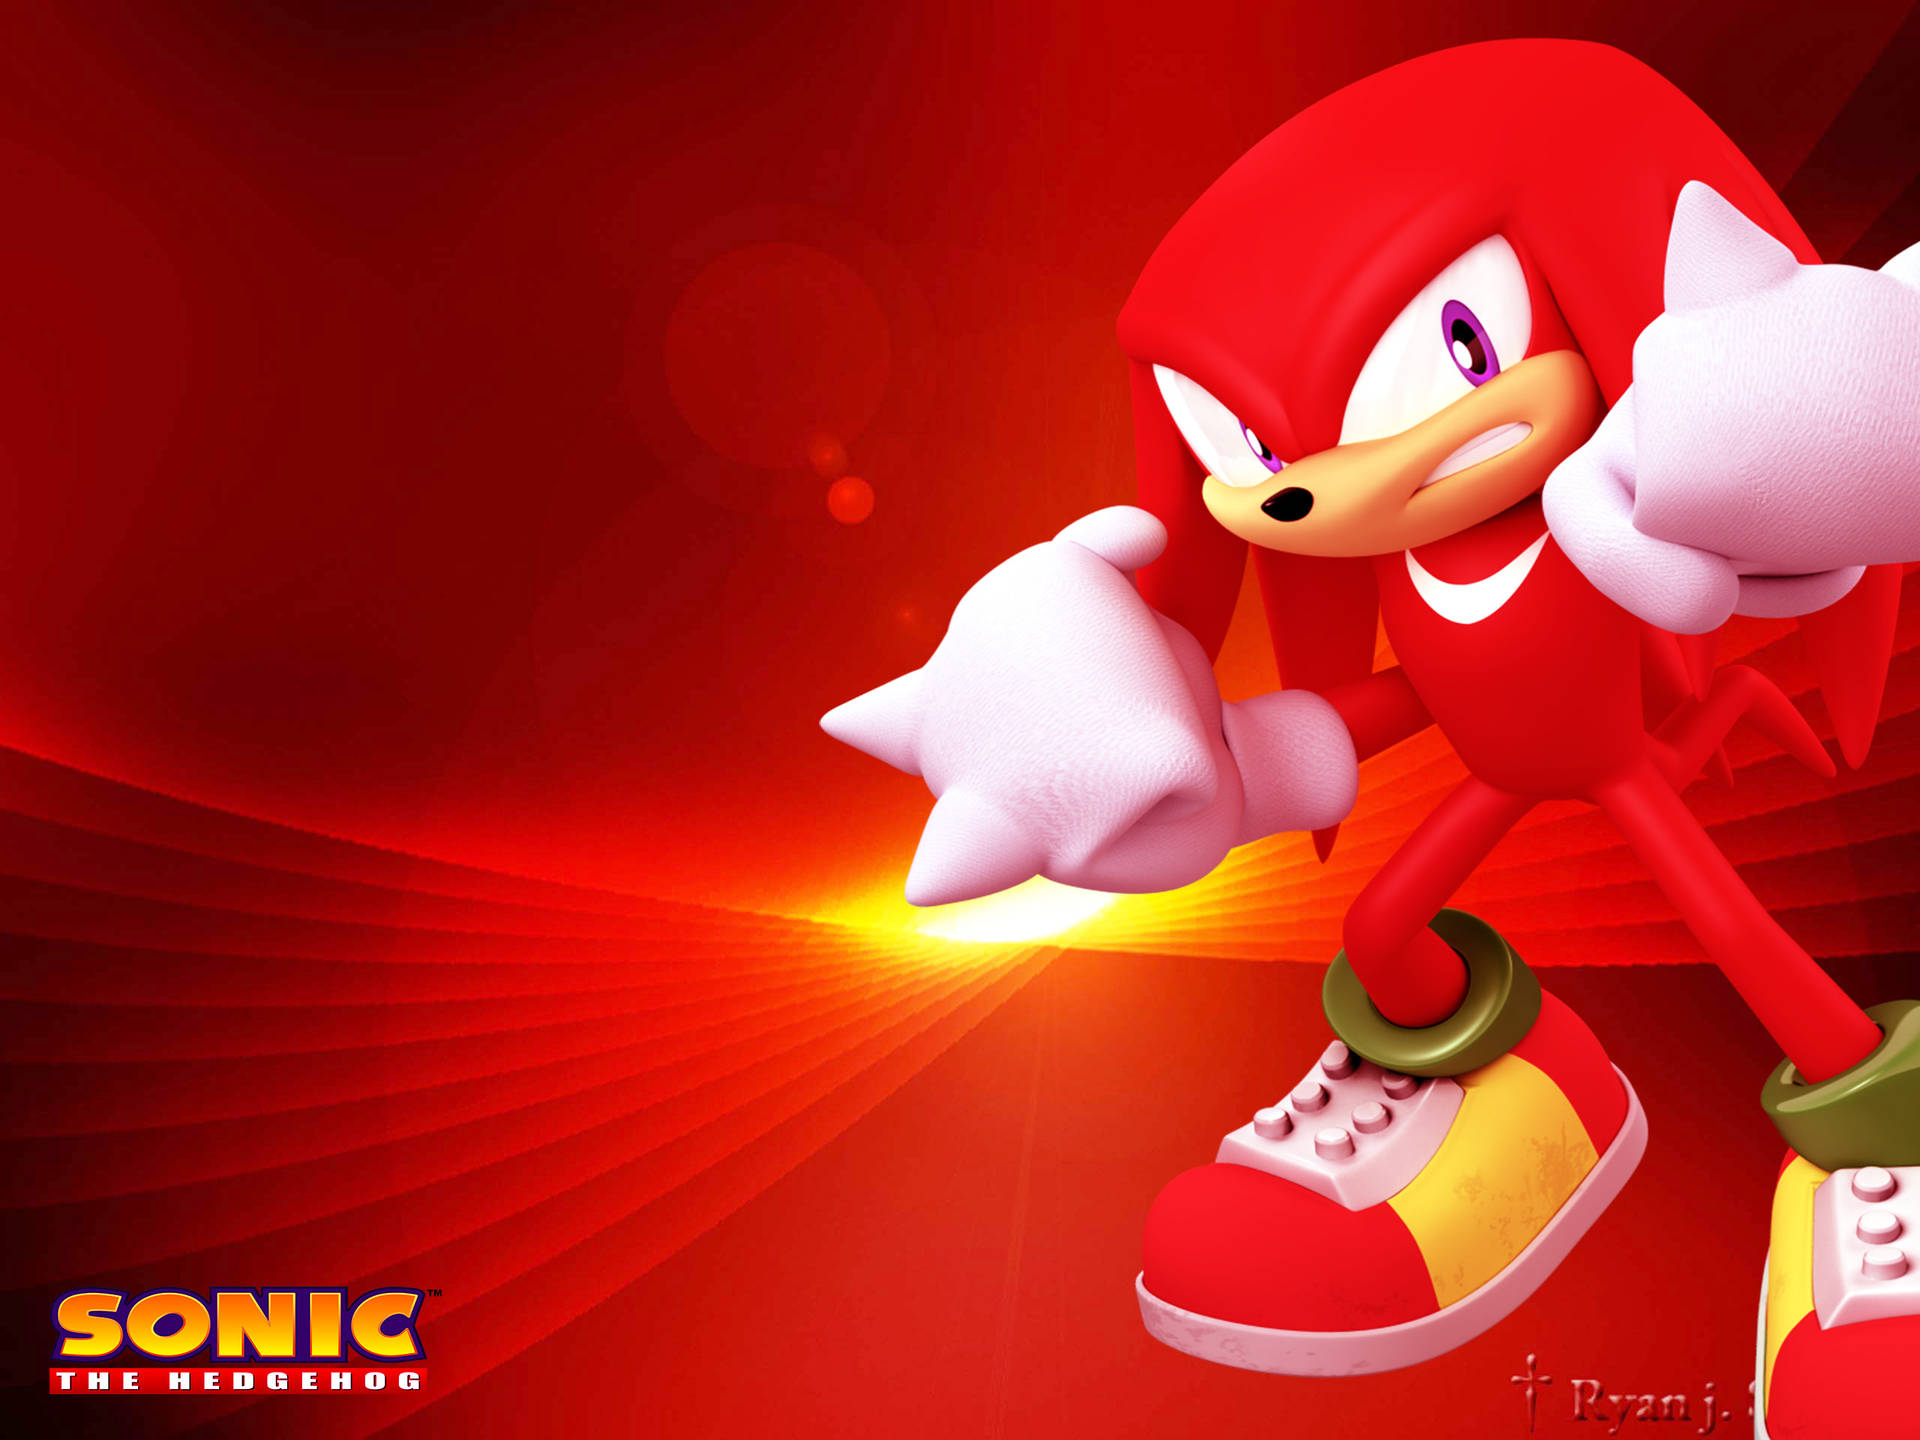 Angry Knuckles The Echidna Art